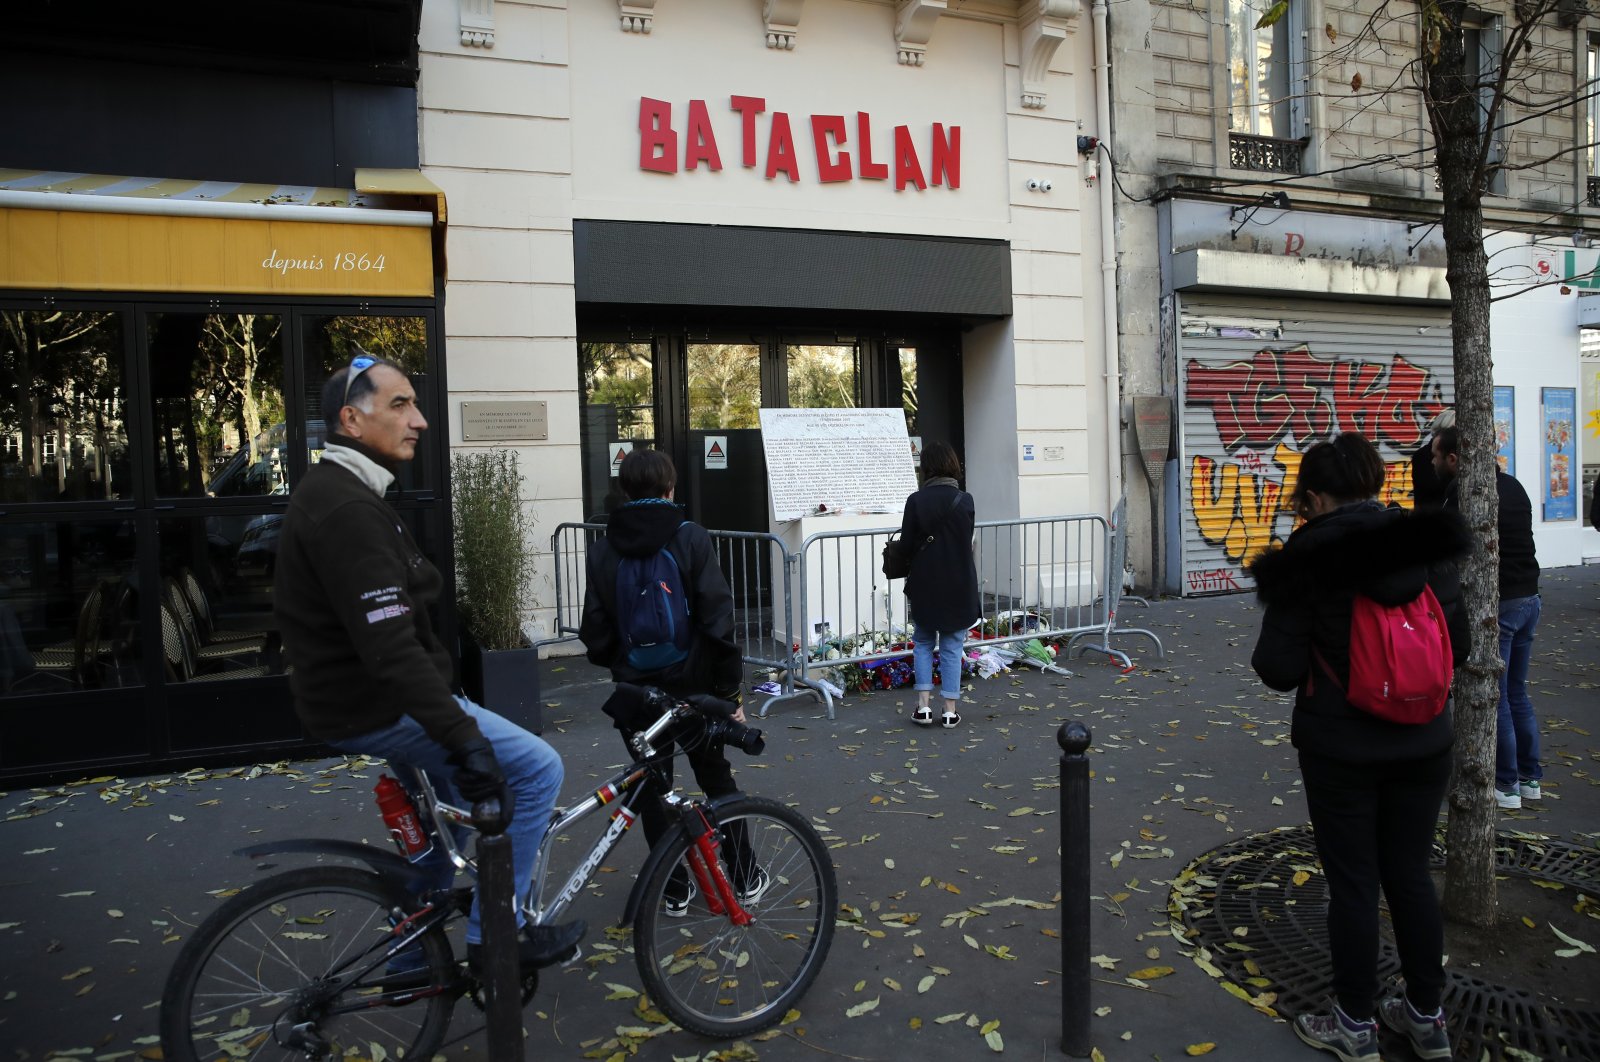 People stand in front of the entrance of the Bataclan concert hall after a ceremony marking the third anniversary of the Paris attacks of November 2015 in which 130 people were killed, in Paris, France, Nov. 13, 2018. (AP Photo)